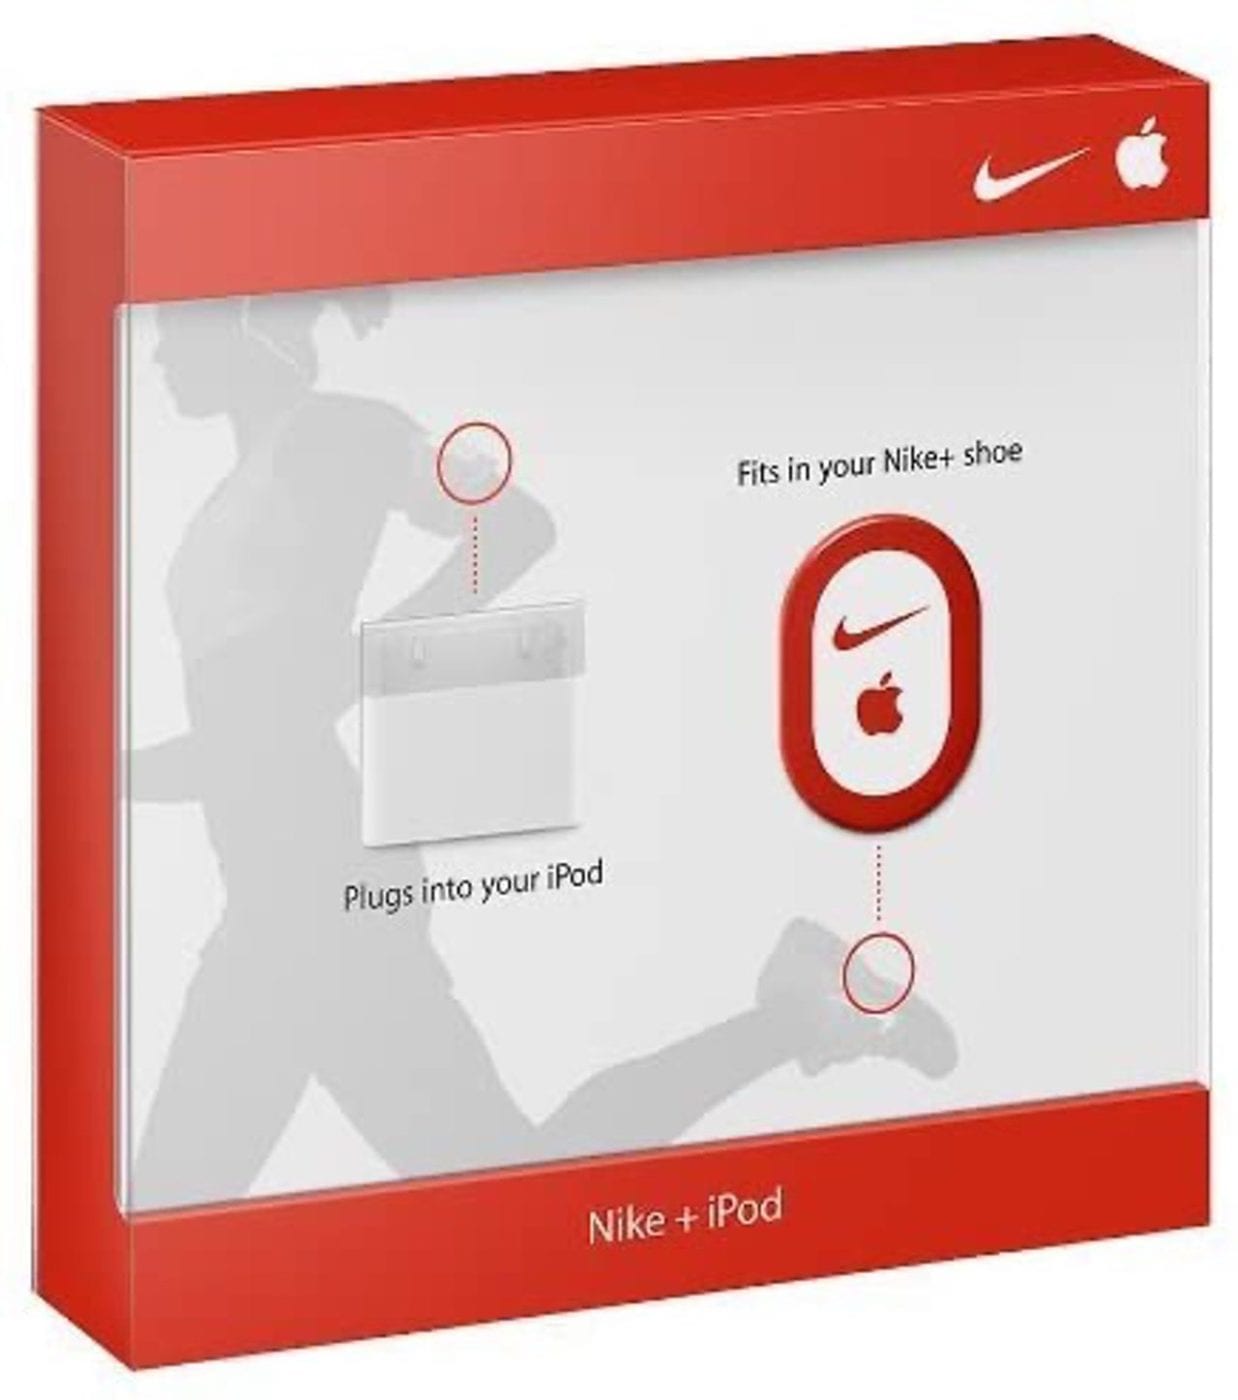 The Nike+ iPod Sport Kit was the first connected sports device